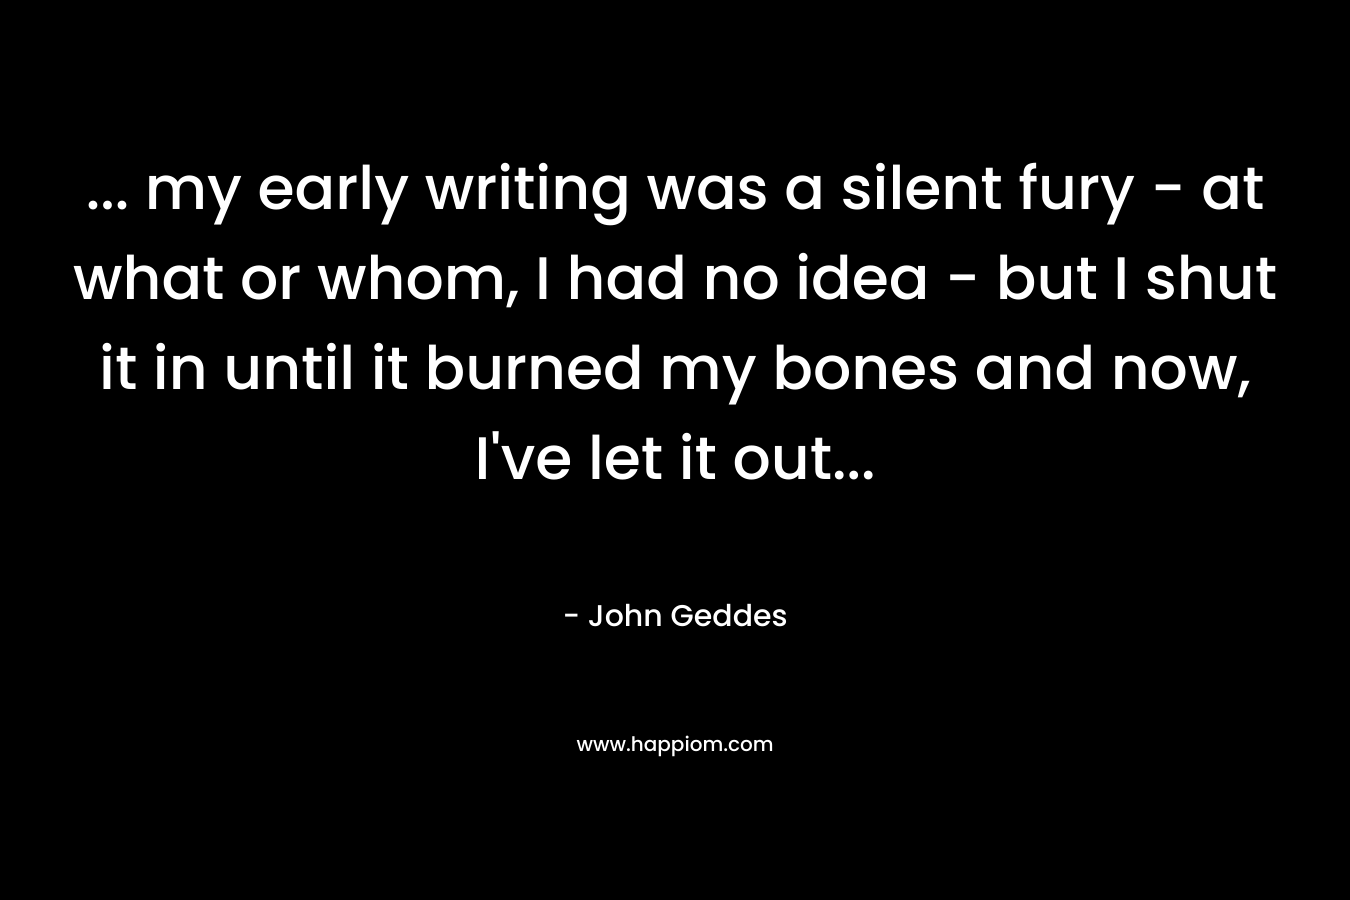 … my early writing was a silent fury – at what or whom, I had no idea – but I shut it in until it burned my bones and now, I’ve let it out… – John Geddes